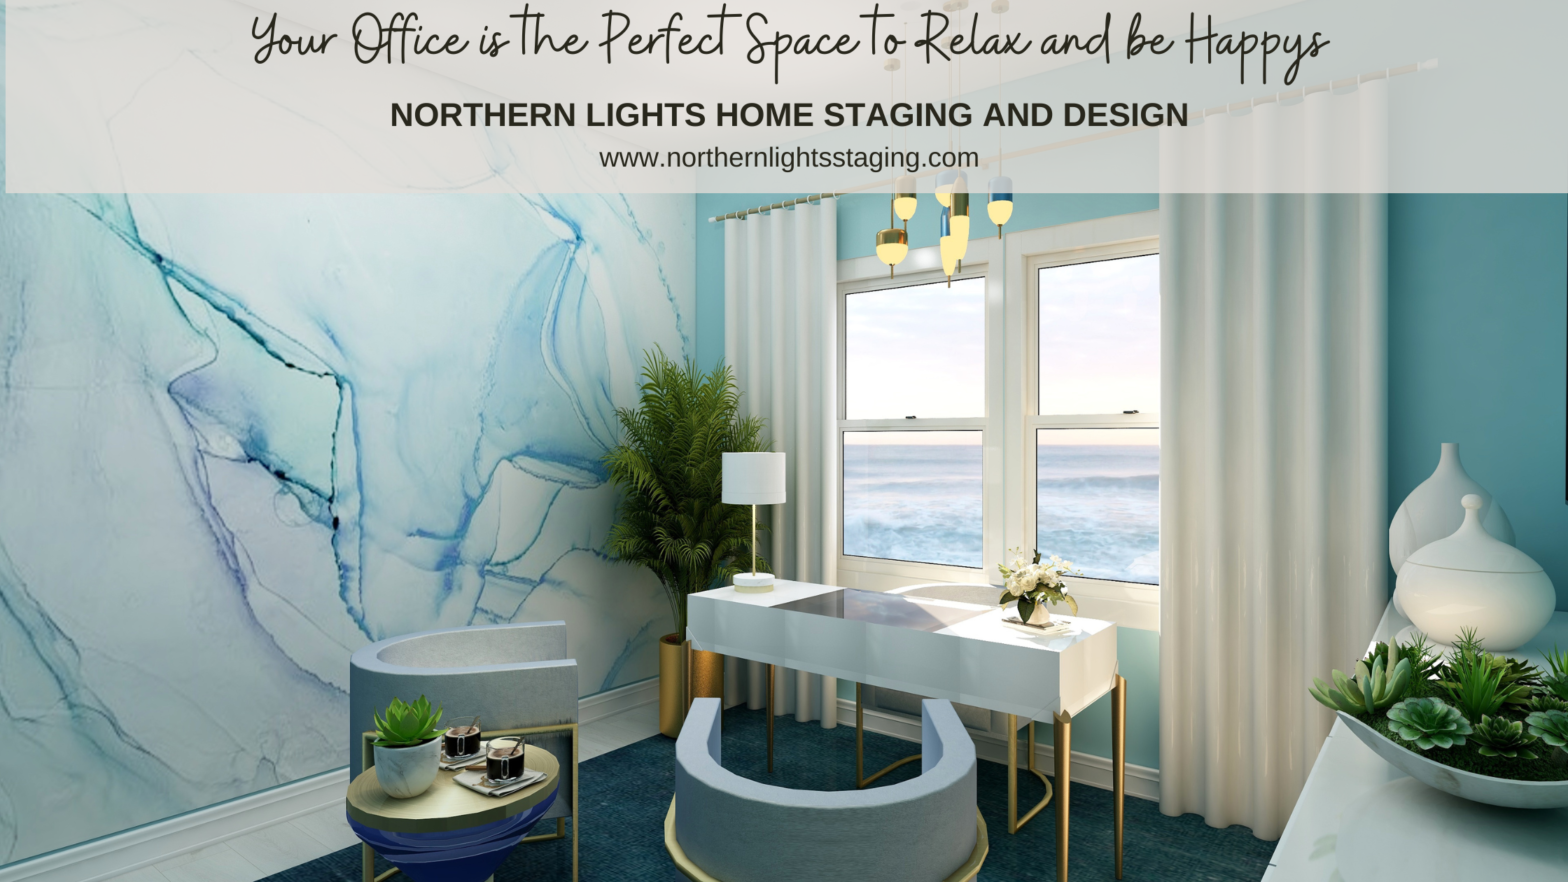 Your Office is the Perfect Space to Relax and be Happy